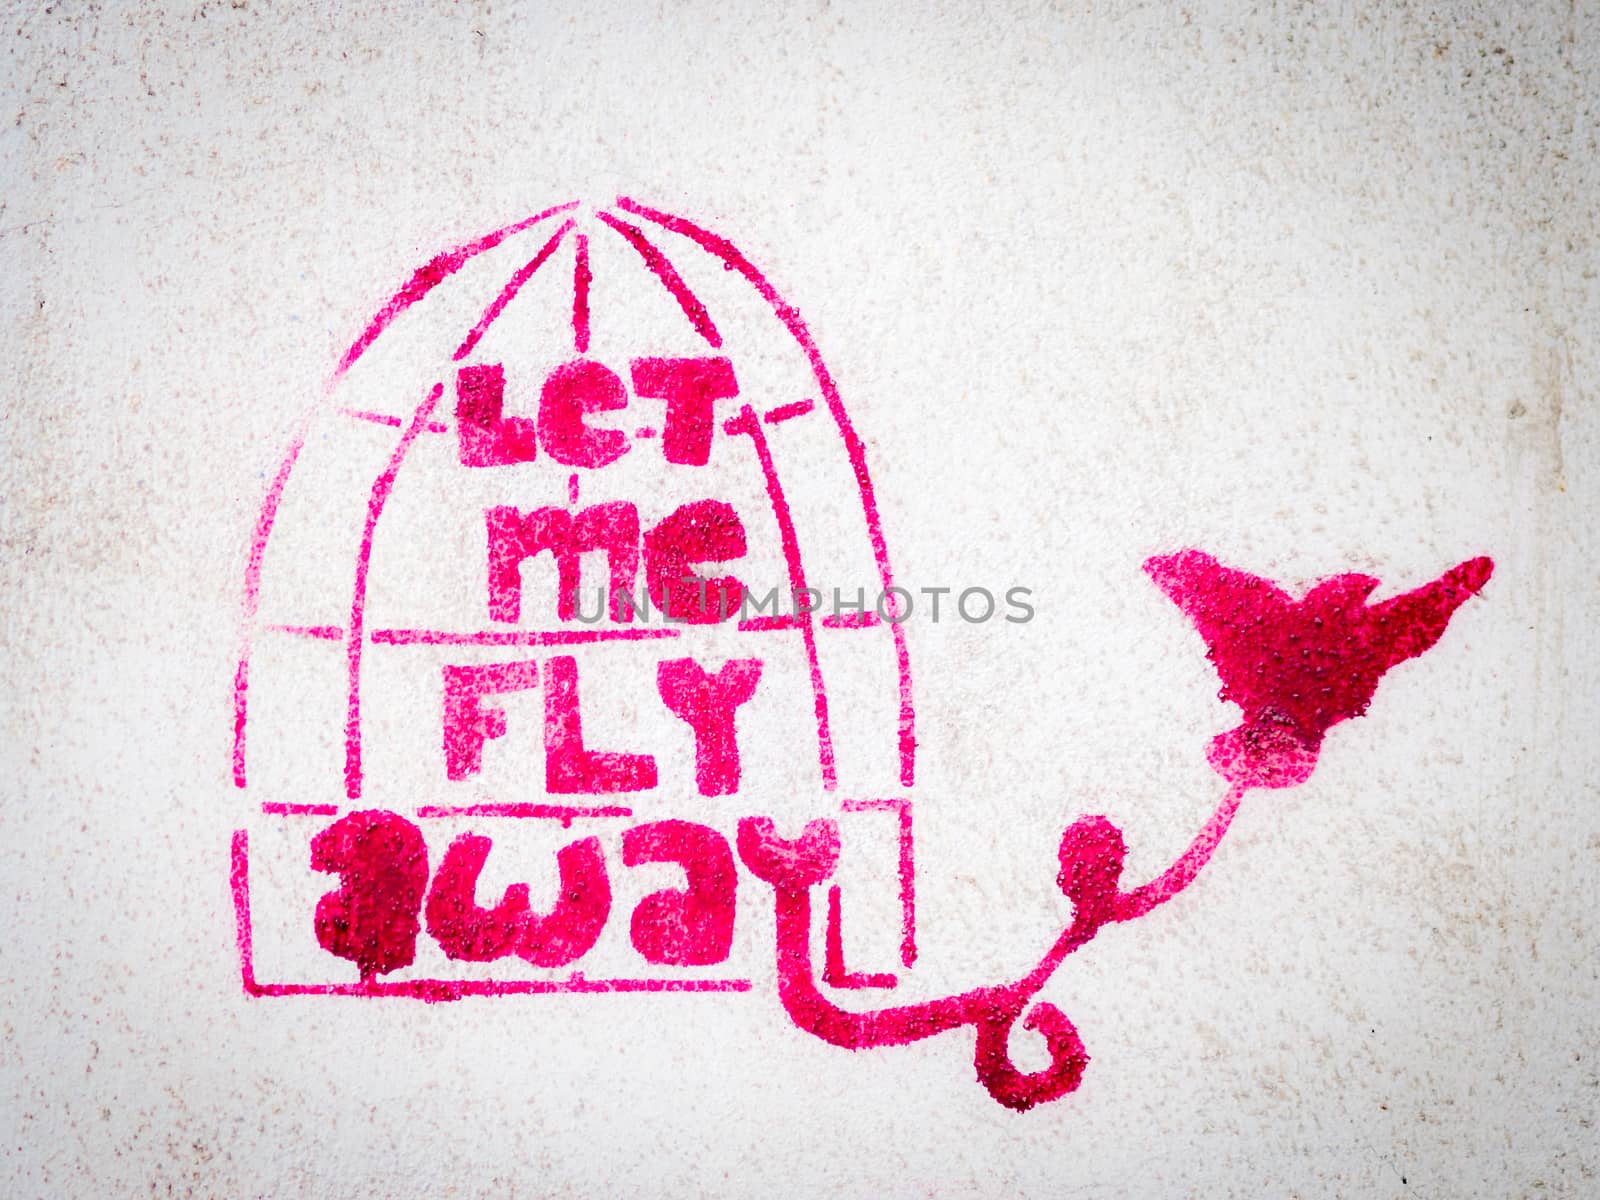 Pink stencil graffiti with bird leaving a cage by weruskak